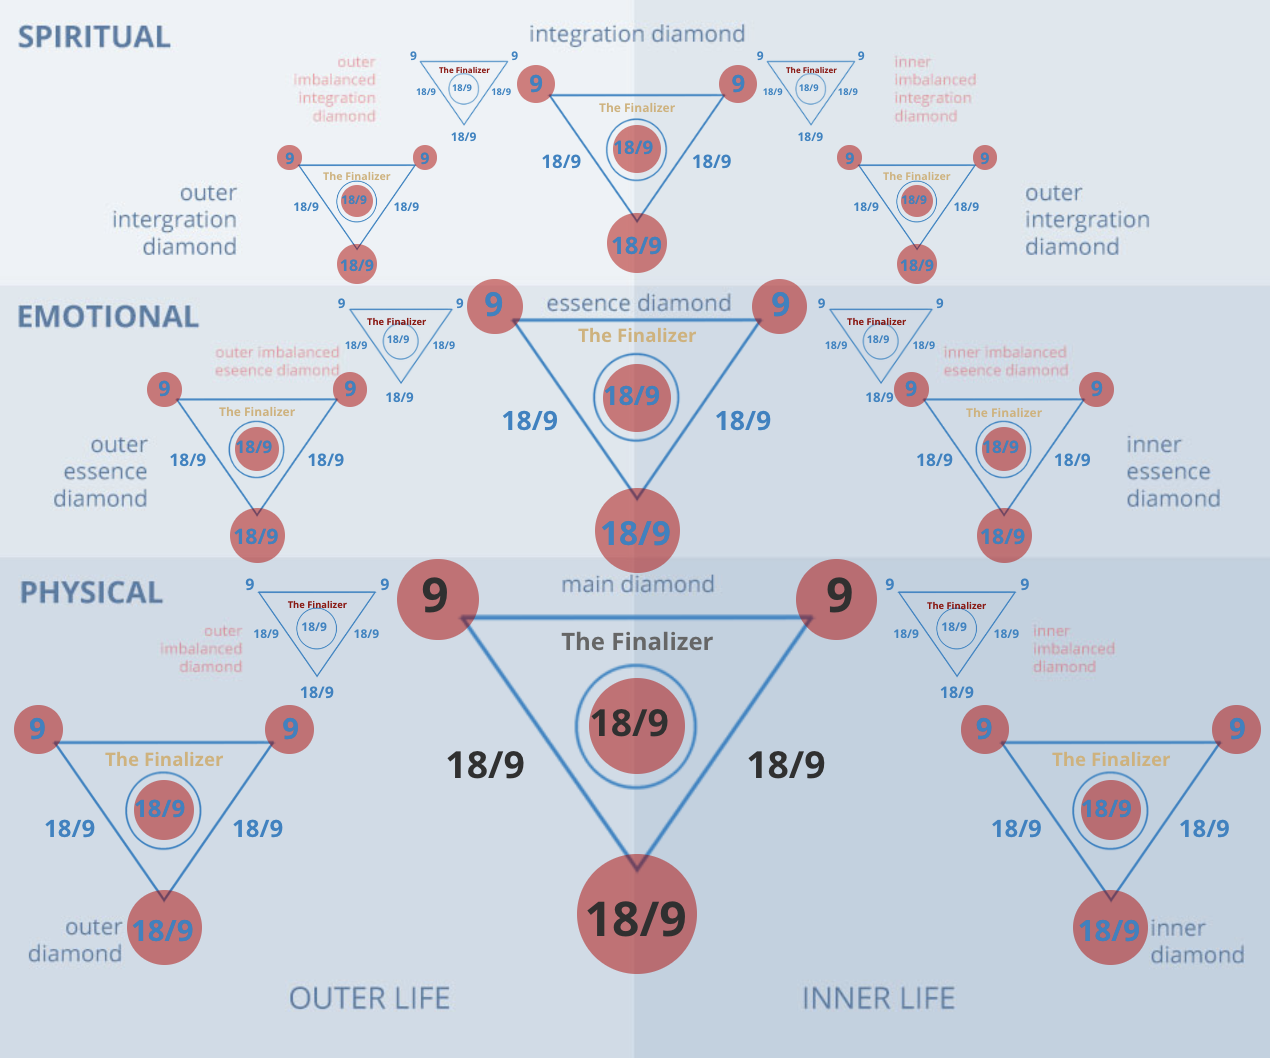 The Numerology Big Diamond Chart for the number 99